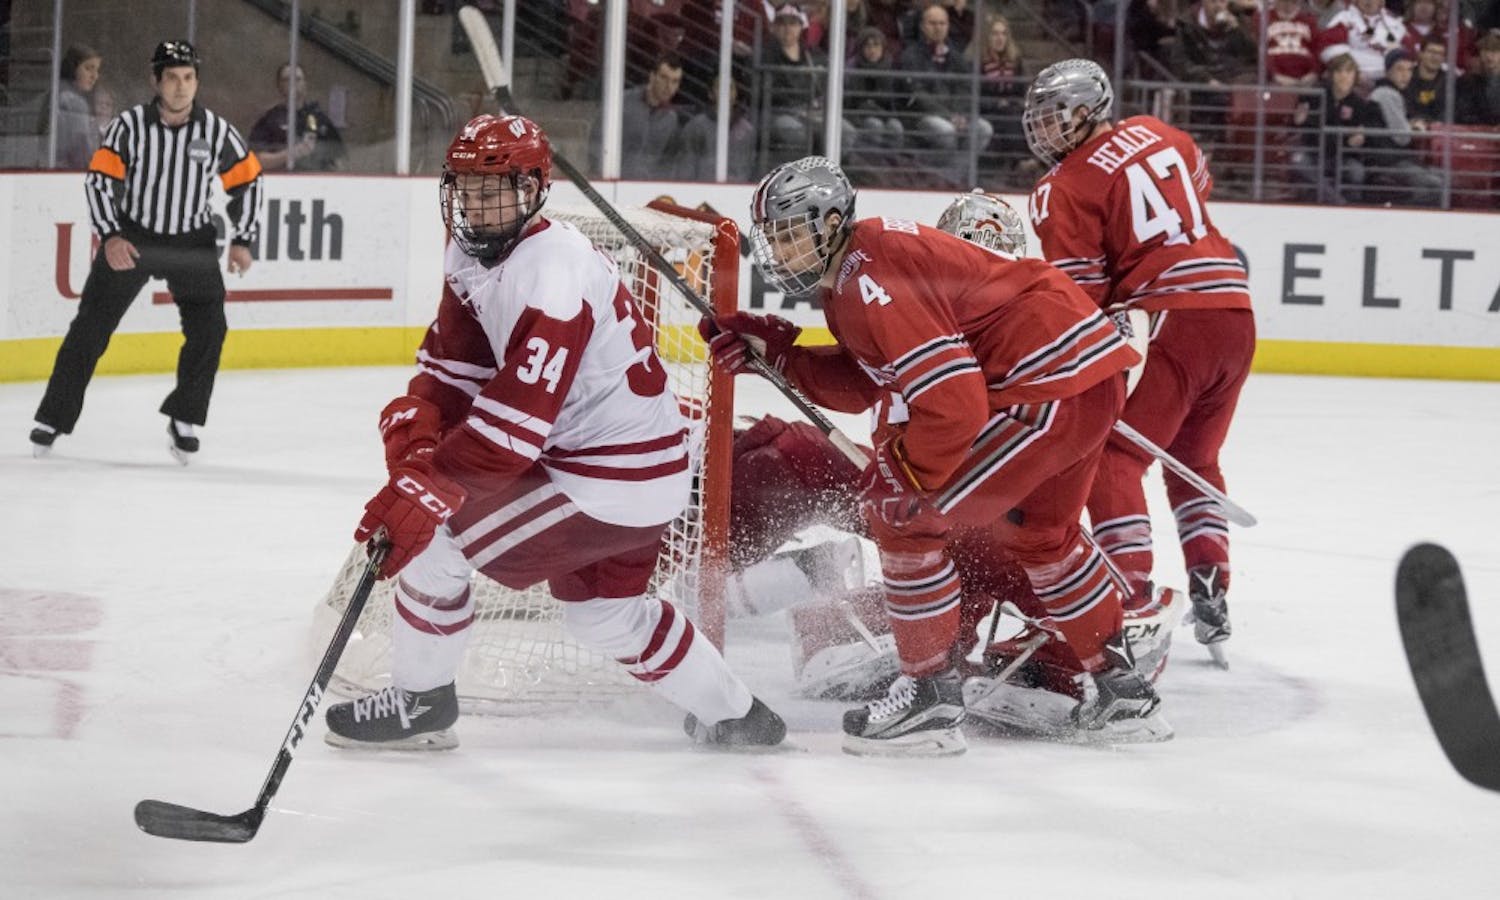 Trent Frederic has not been as dominant as many predicted thus far in his sophomore season. If Frederic can respond and pick up some offensive momentum, the Badgers will likely earn a sweep this weekend against Michigan State.